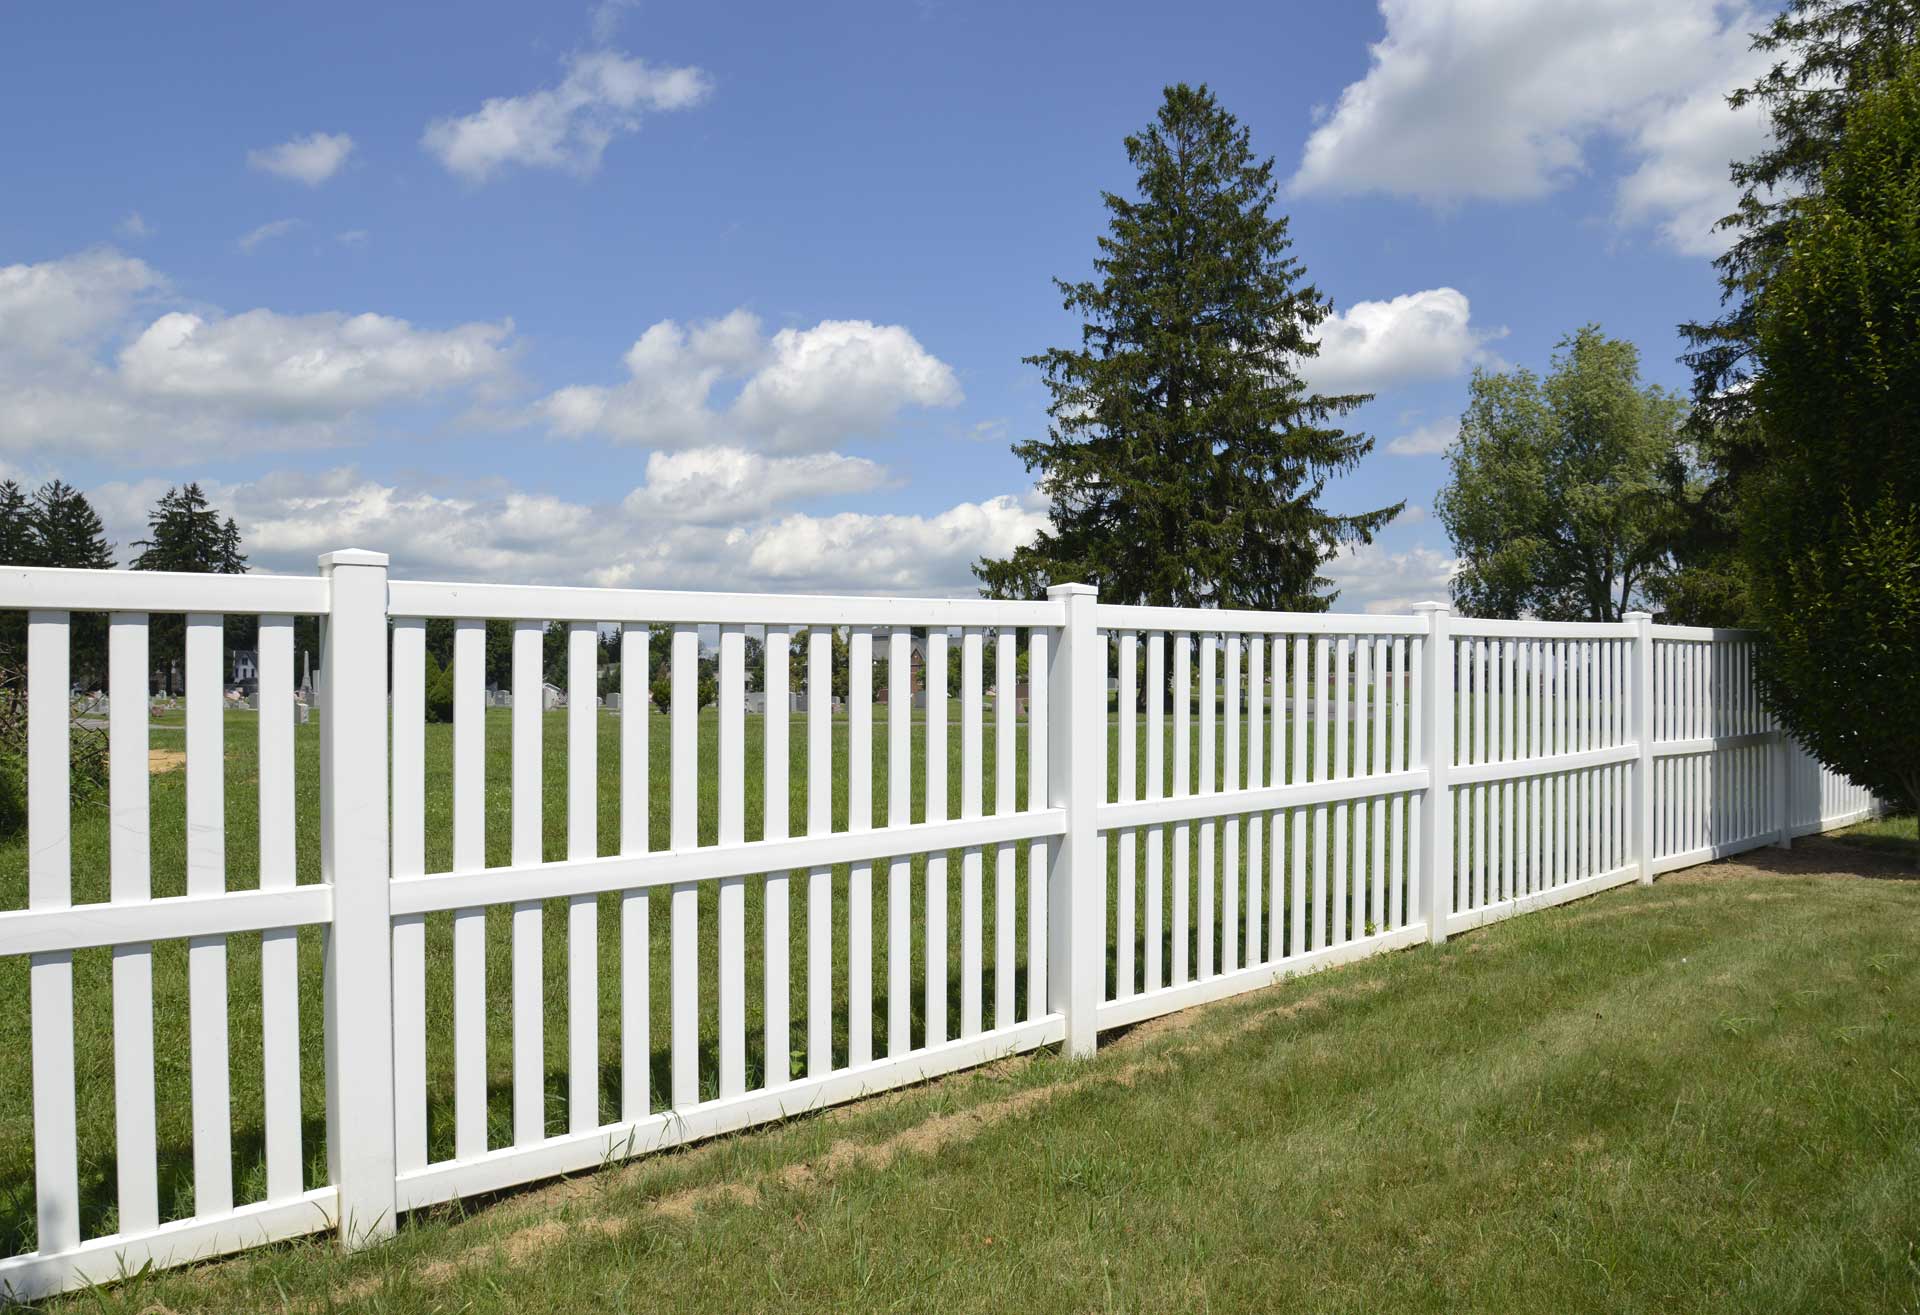 A newly constructed combo style vinyl fence against a bright blue sky and green grass